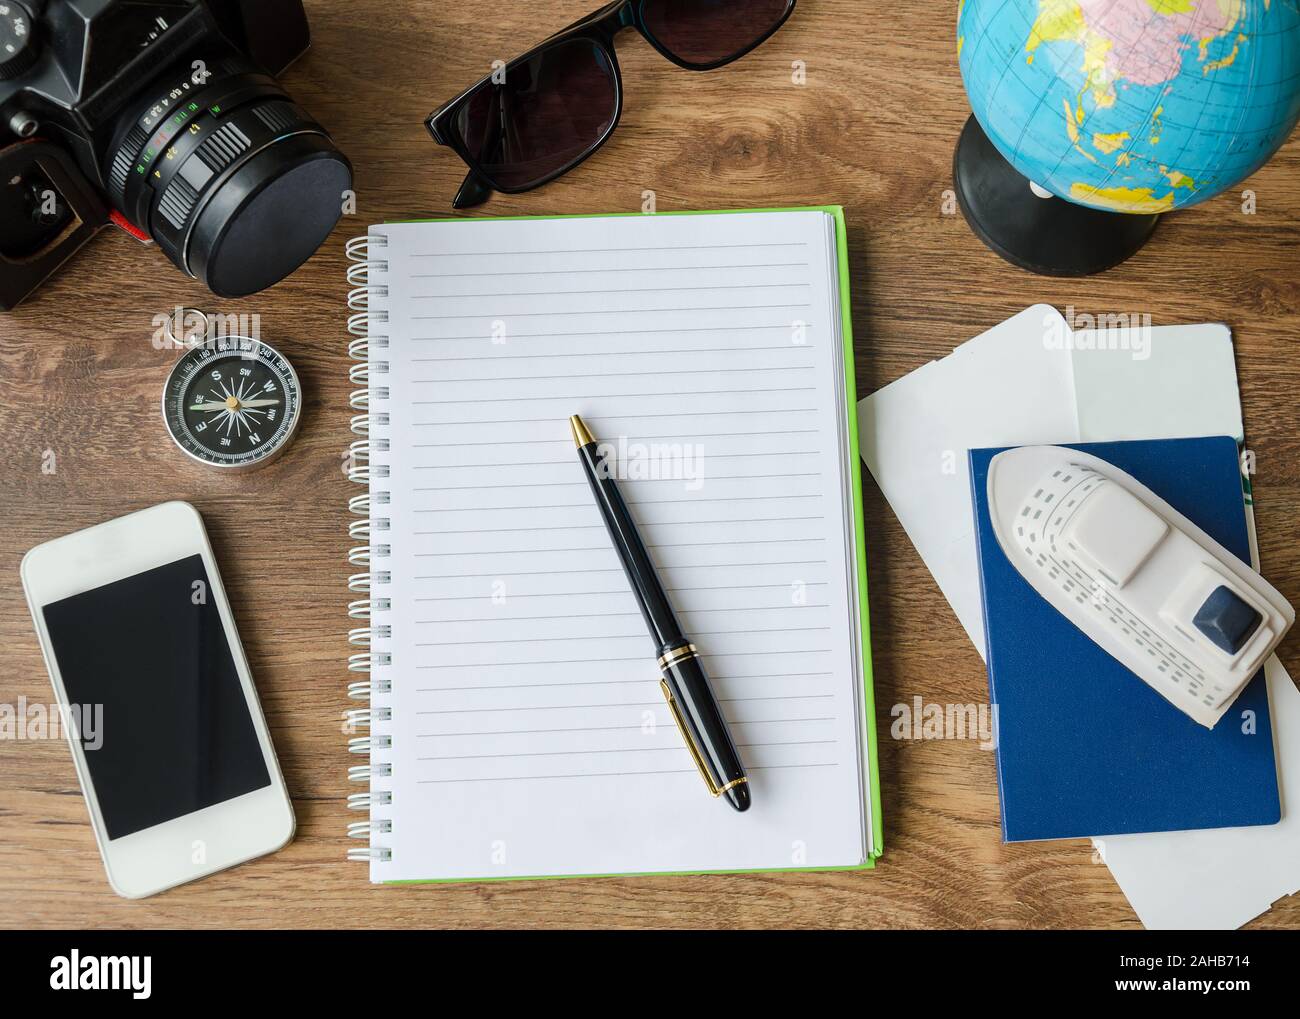 Notepad, credit cards, passport, ticket, luggage, phone and compass on a wooden background, set for travel planning Stock Photo